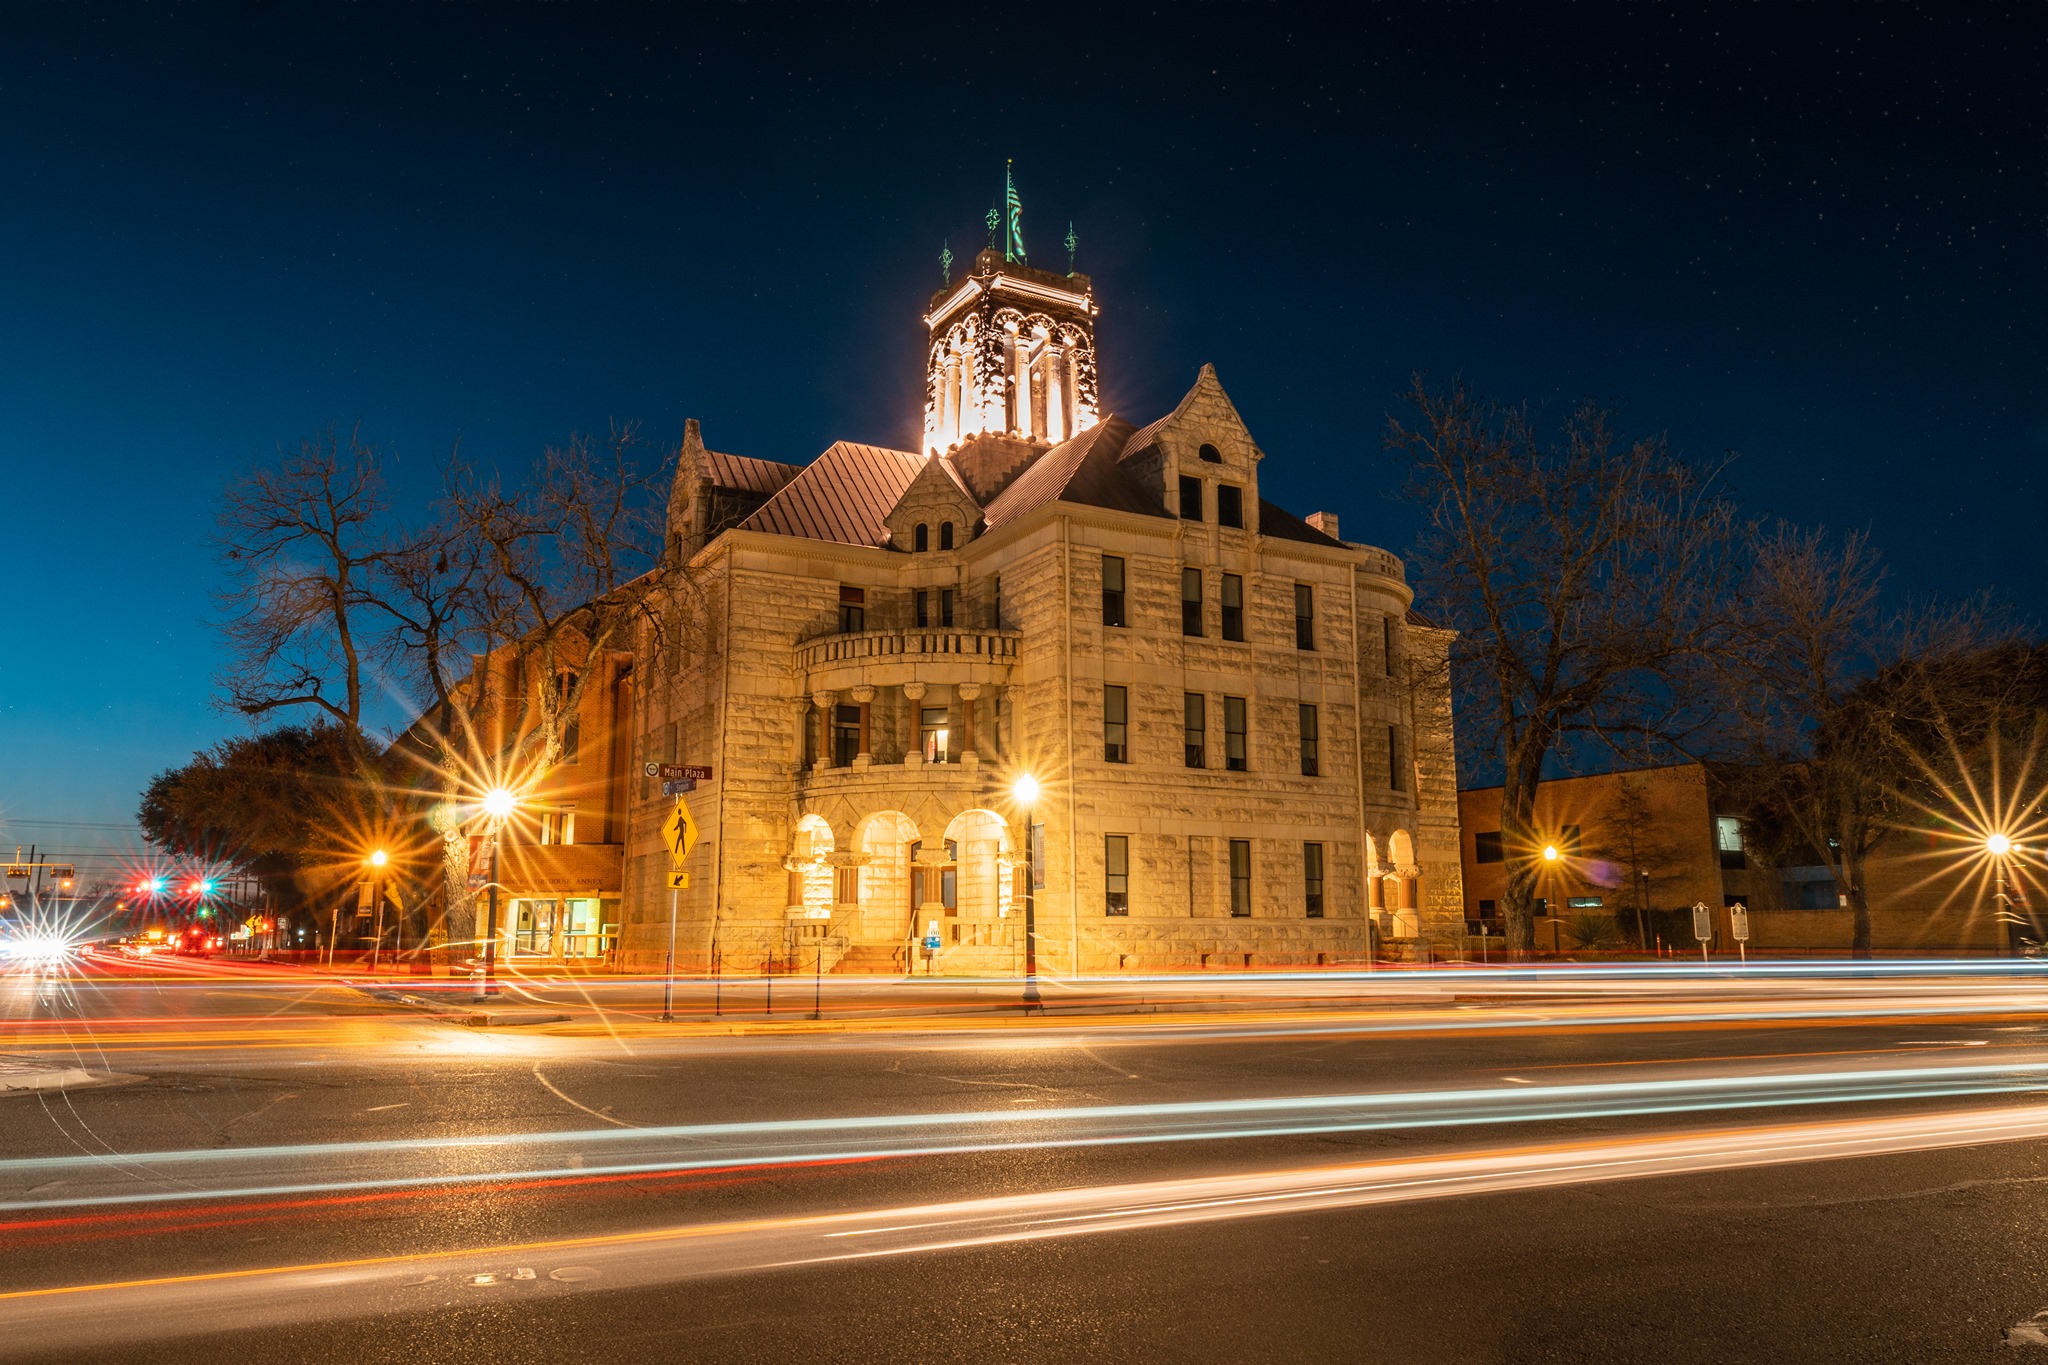 Comal County courthouse